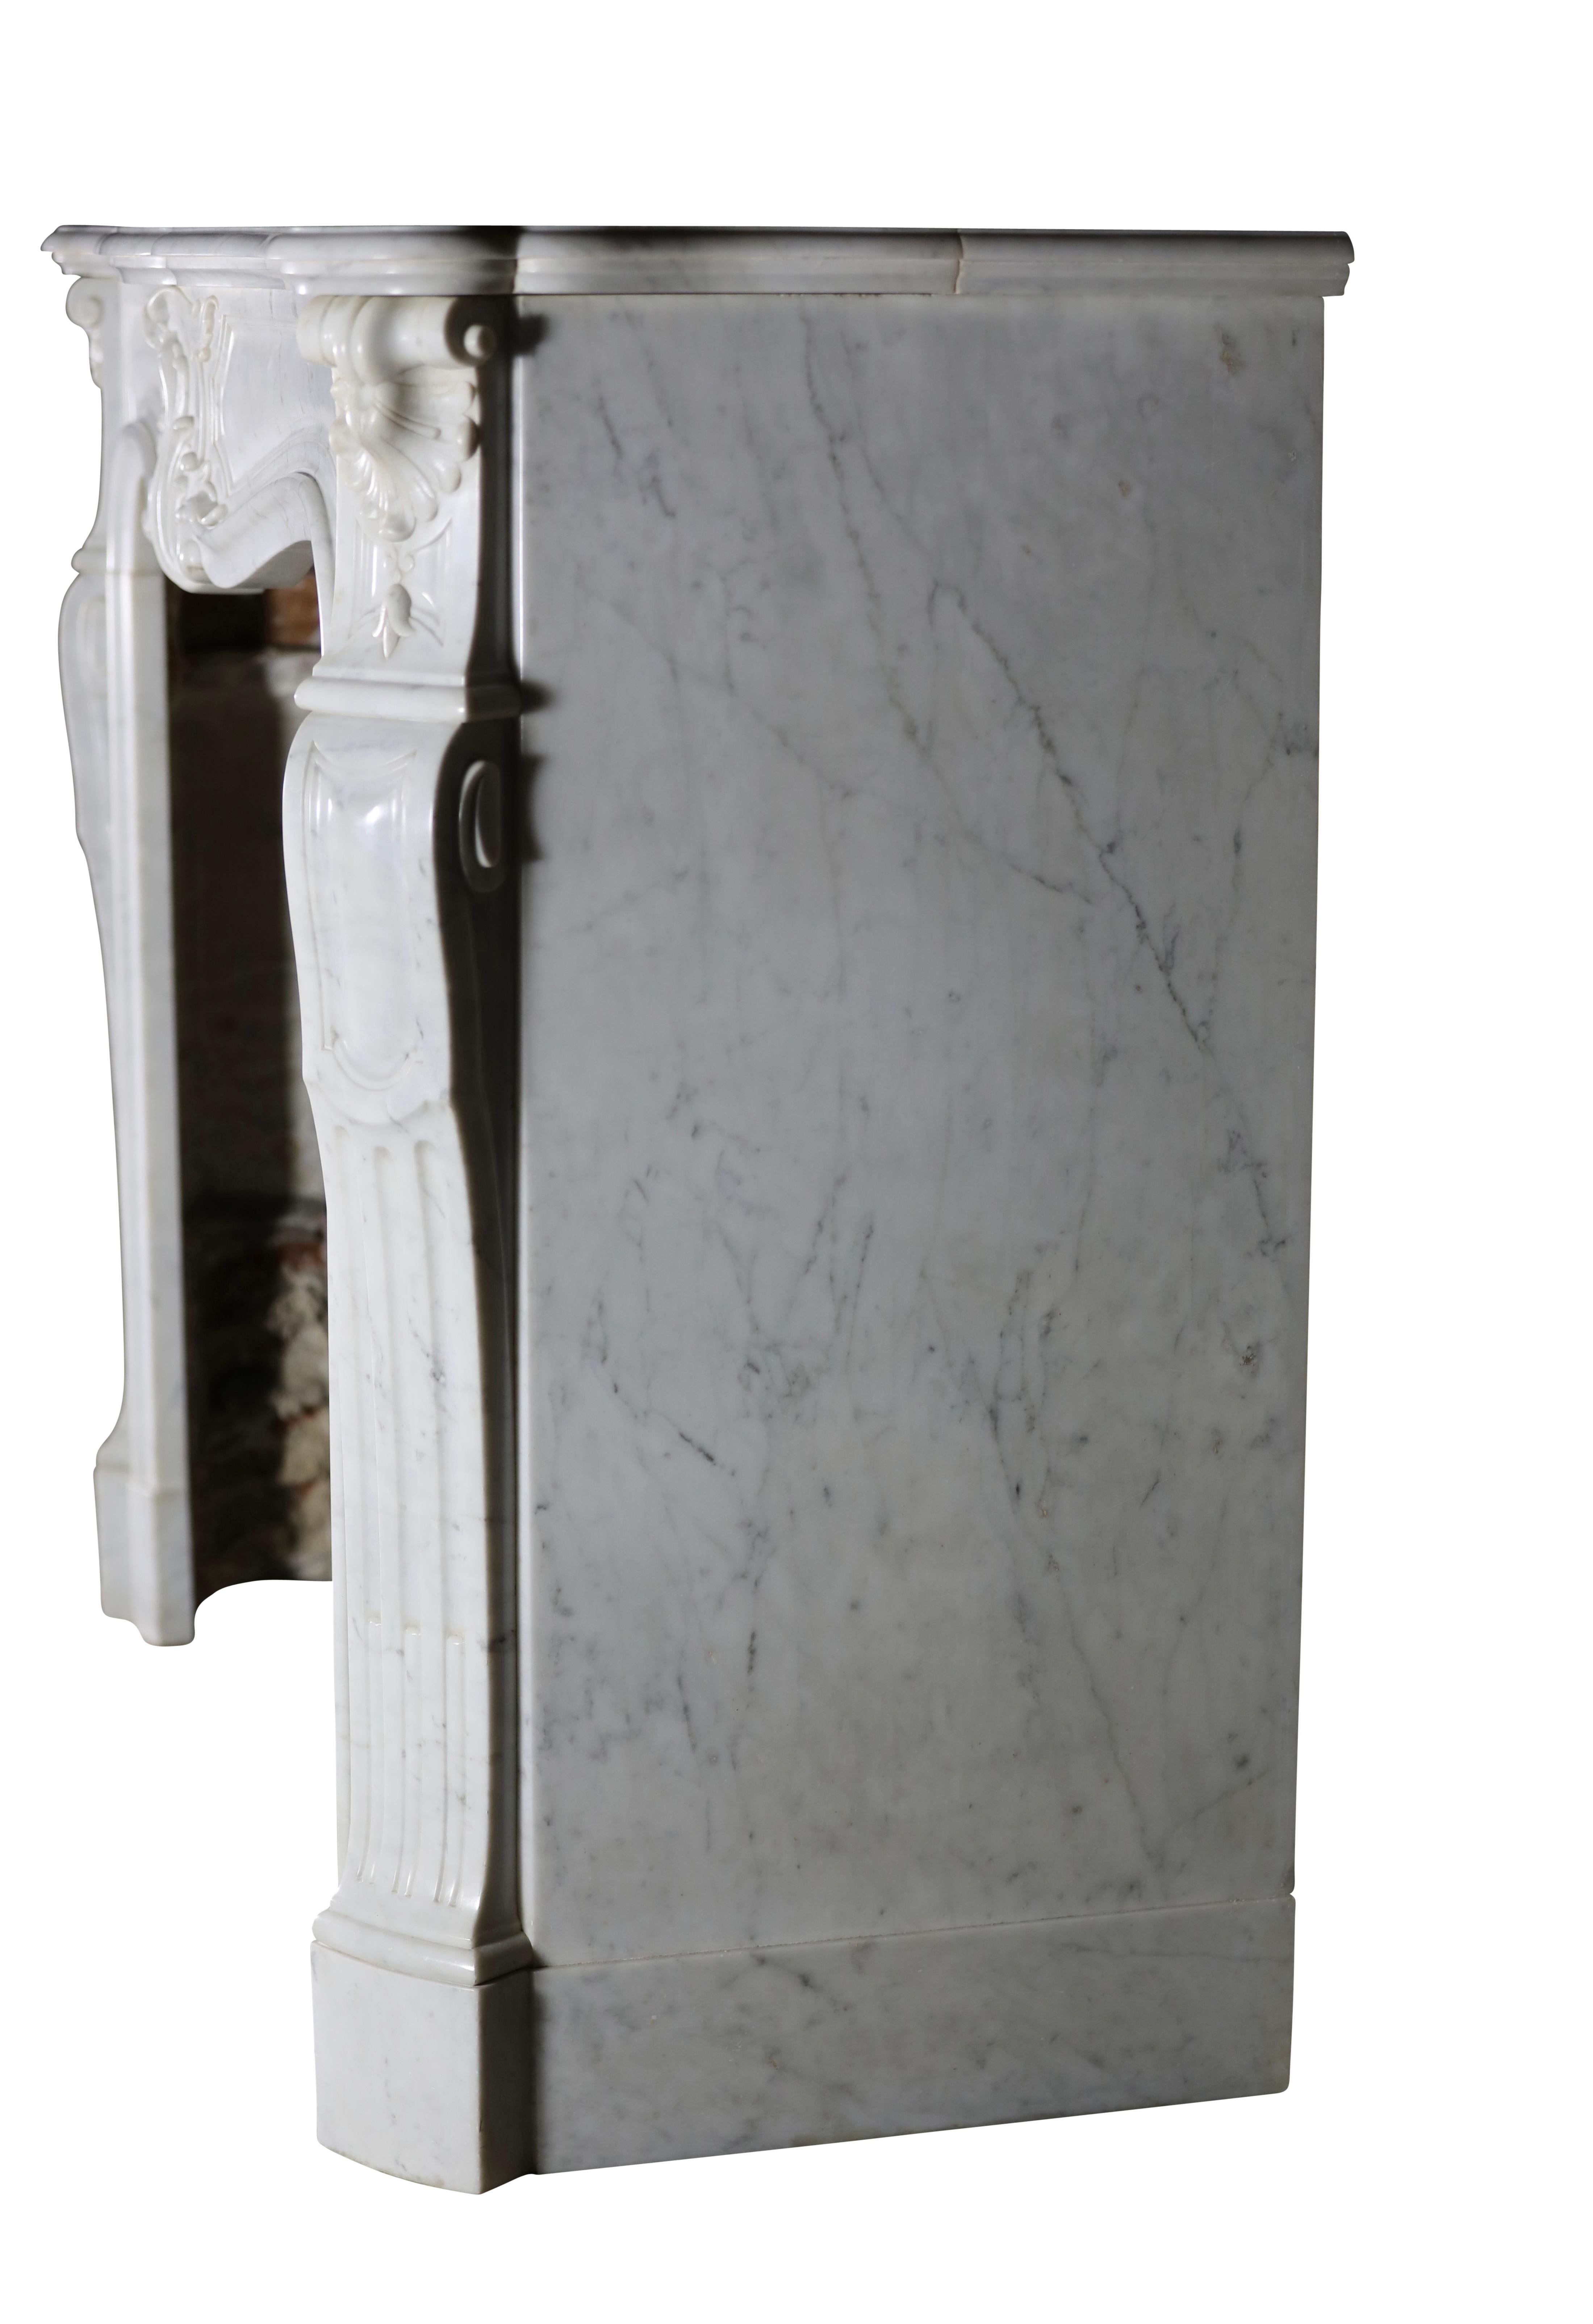 Exquisite Antique White Marble Fireplace Surround For Sale 1